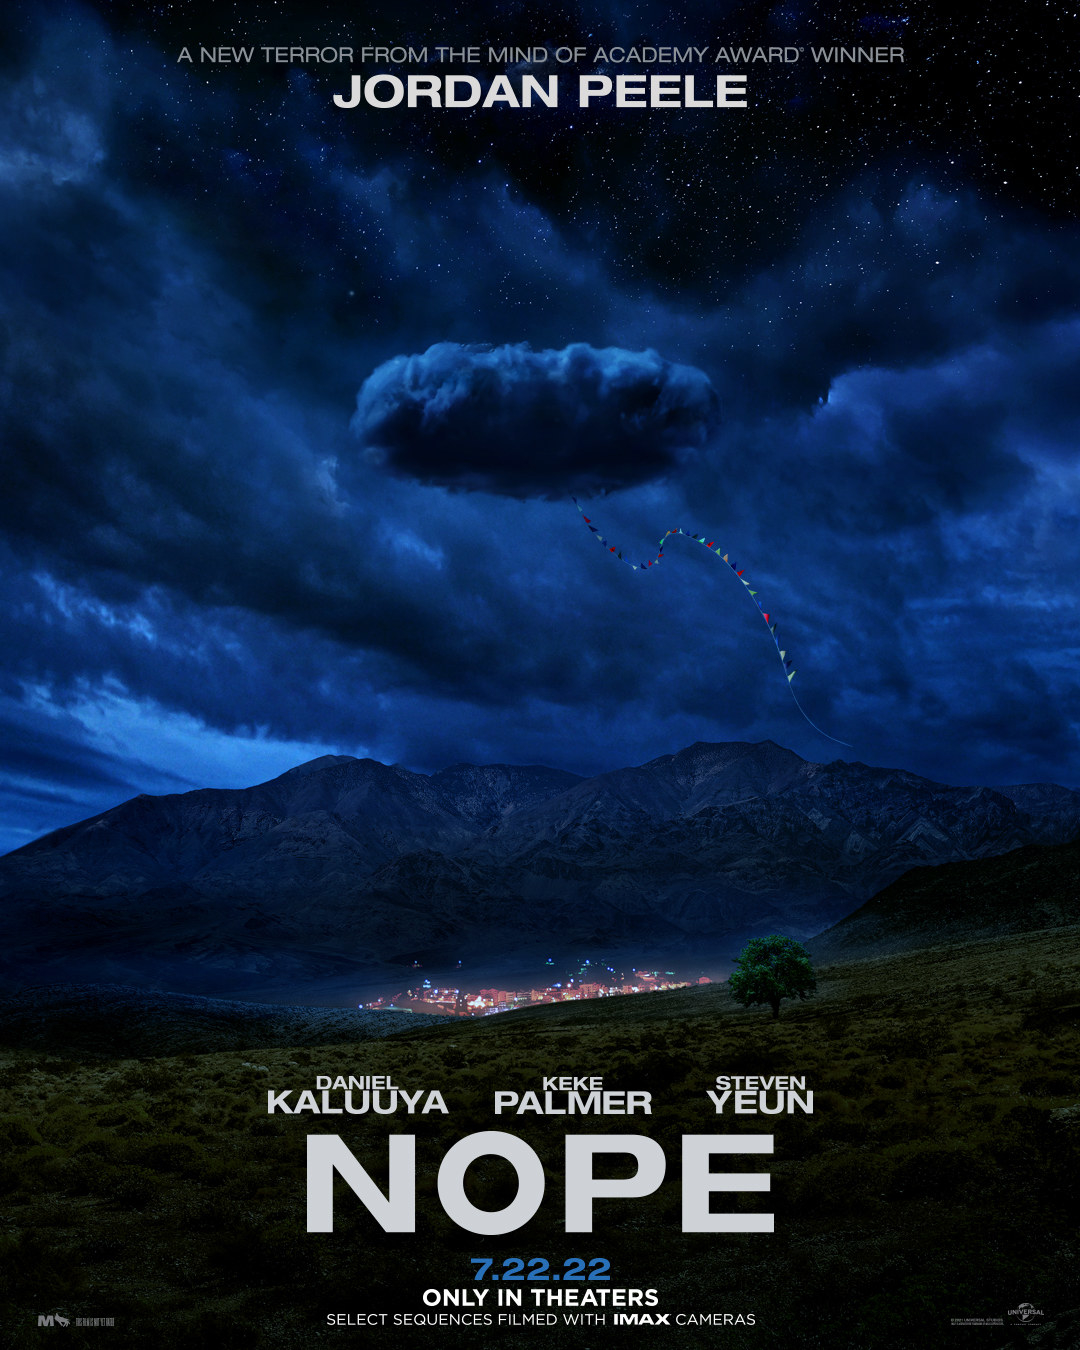 Poster for the movie Nope by Jordan Peele, featuring a cloud with a kite tail coming out of it hovering over a small lit up town